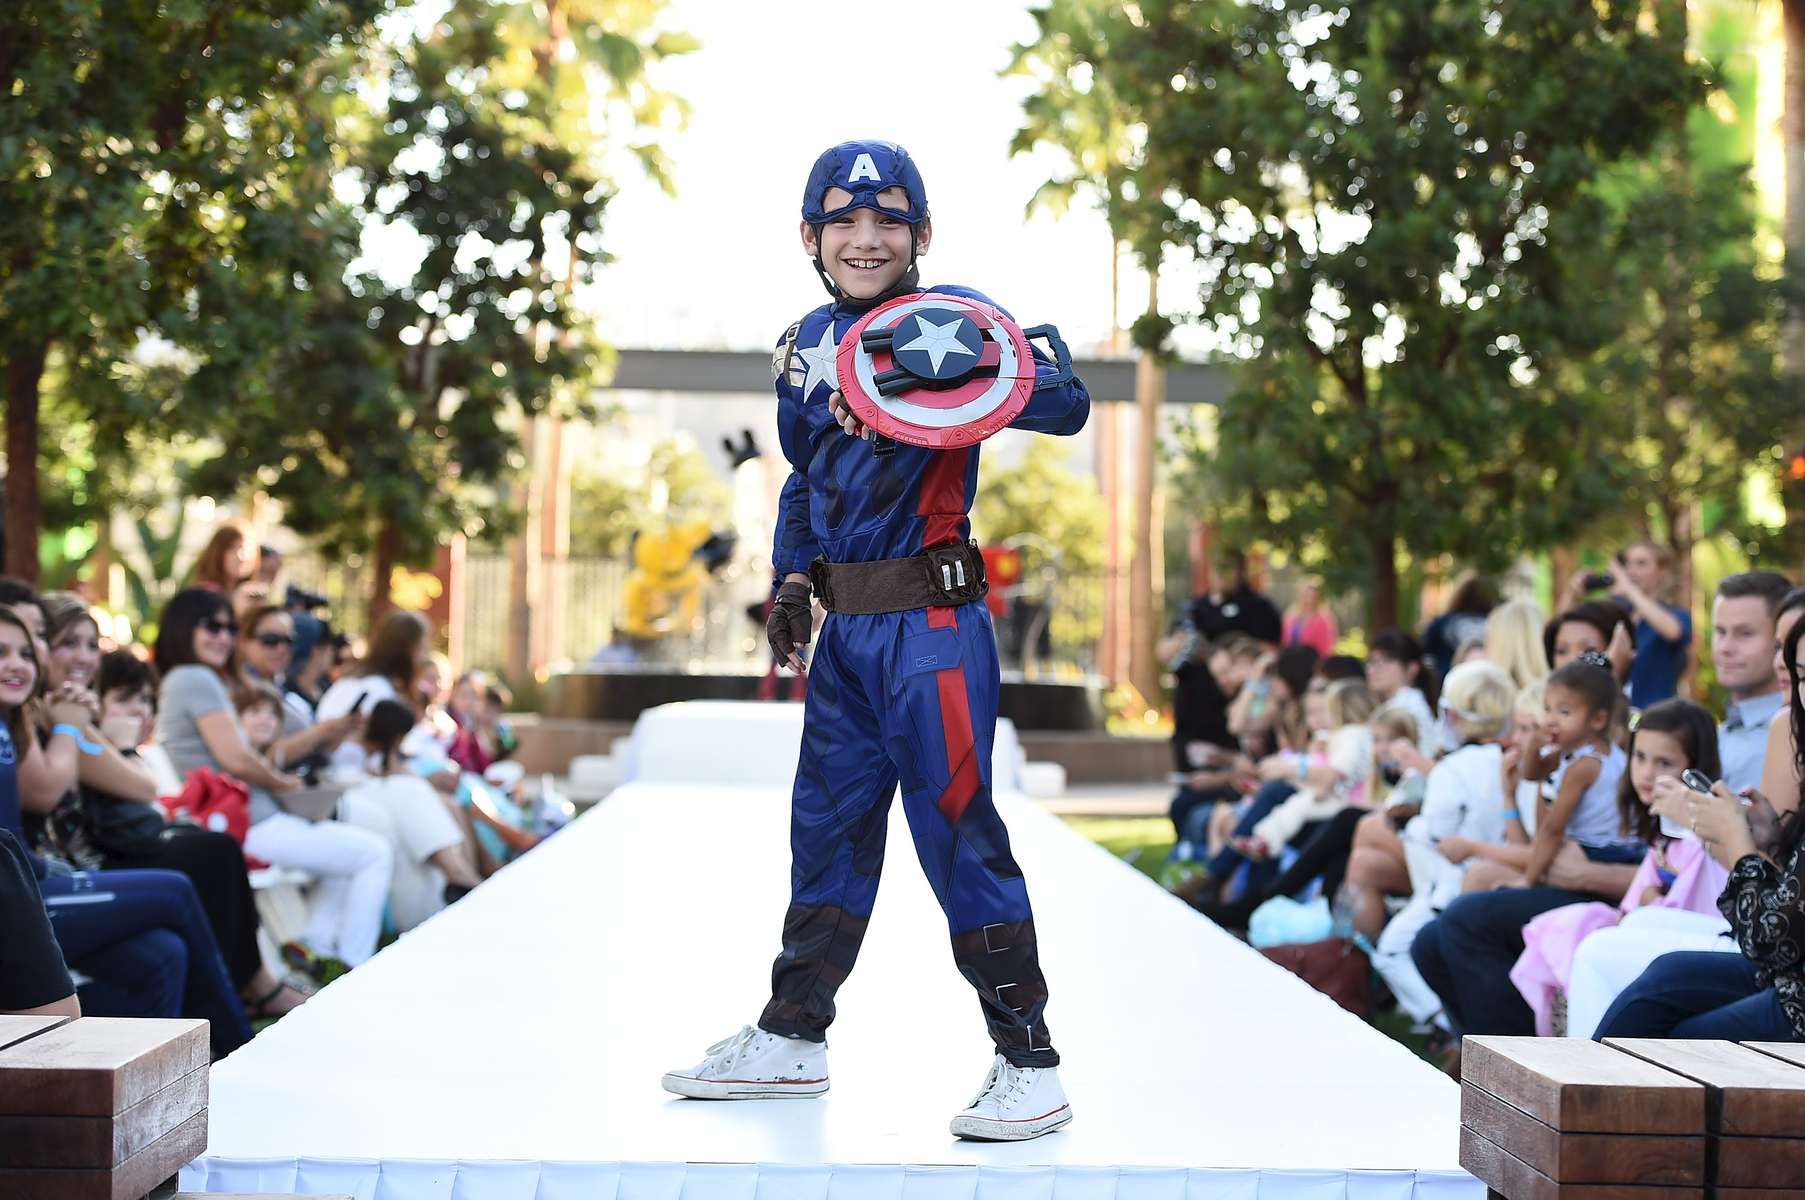 IMAGE DISTRIBUTED FOR DISNEY CONSUMER PRODUCTS - A model dressed up as Marvel\'s Captain America is seen at Disney Consumer Products\' VIP Halloween Fashion Show on Wednesday, Oct. 1, 2014 in Glendale, Calif. (Photo by Jordan Strauss/Invision for Disney Consumer Products/AP Images)